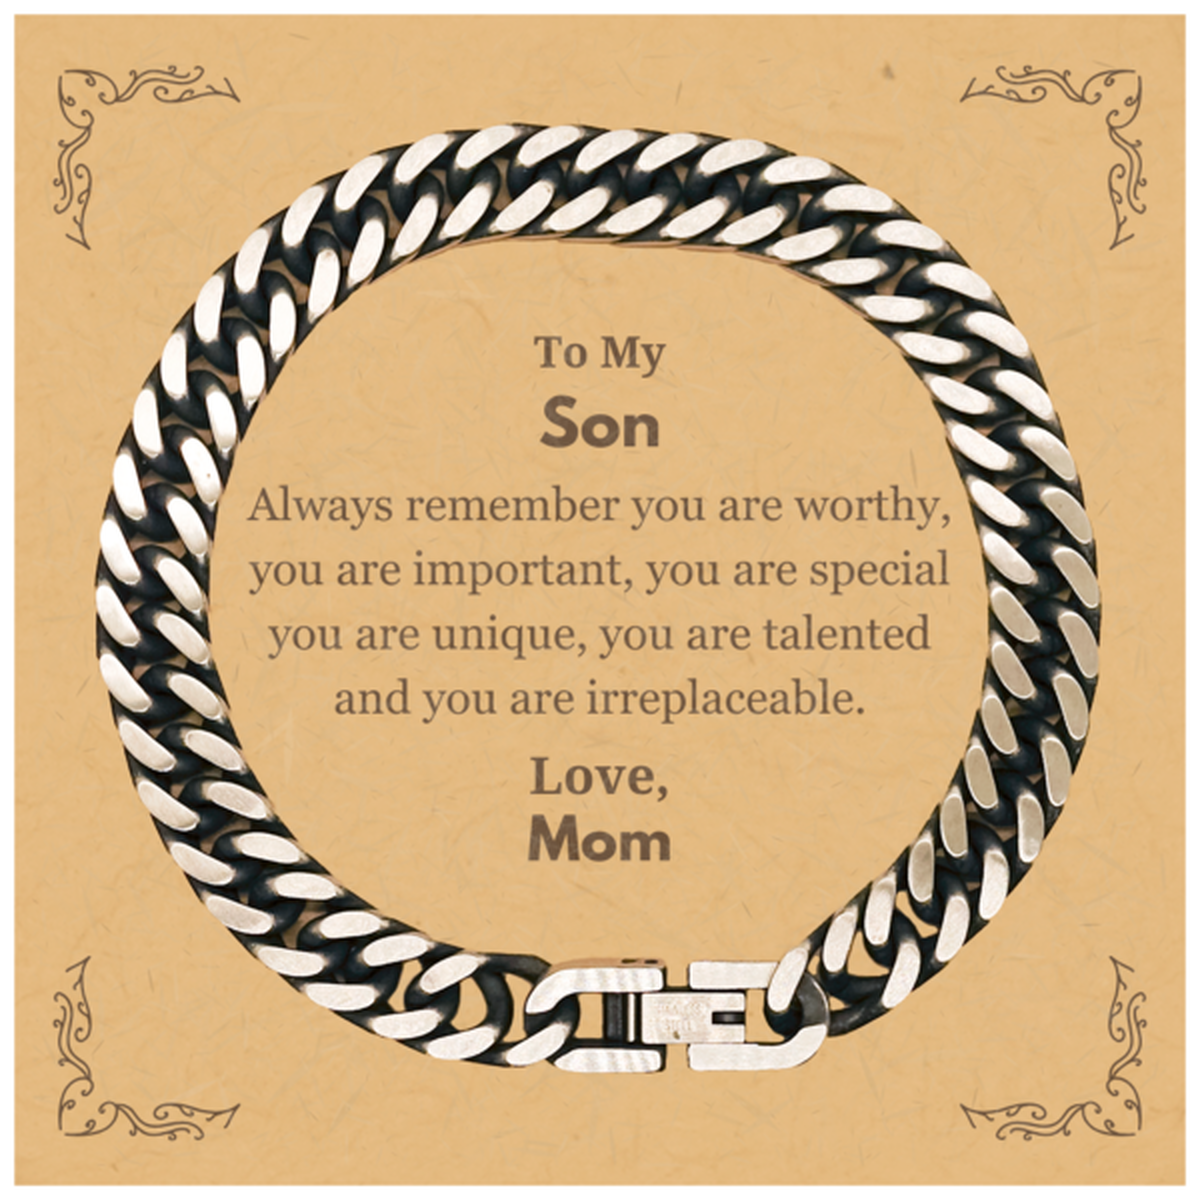 Son Birthday Gifts from Mom, Inspirational Cuban Link Chain Bracelet for Son Christmas Graduation Gifts for Son Always remember you are worthy, you are important. Love, Mom